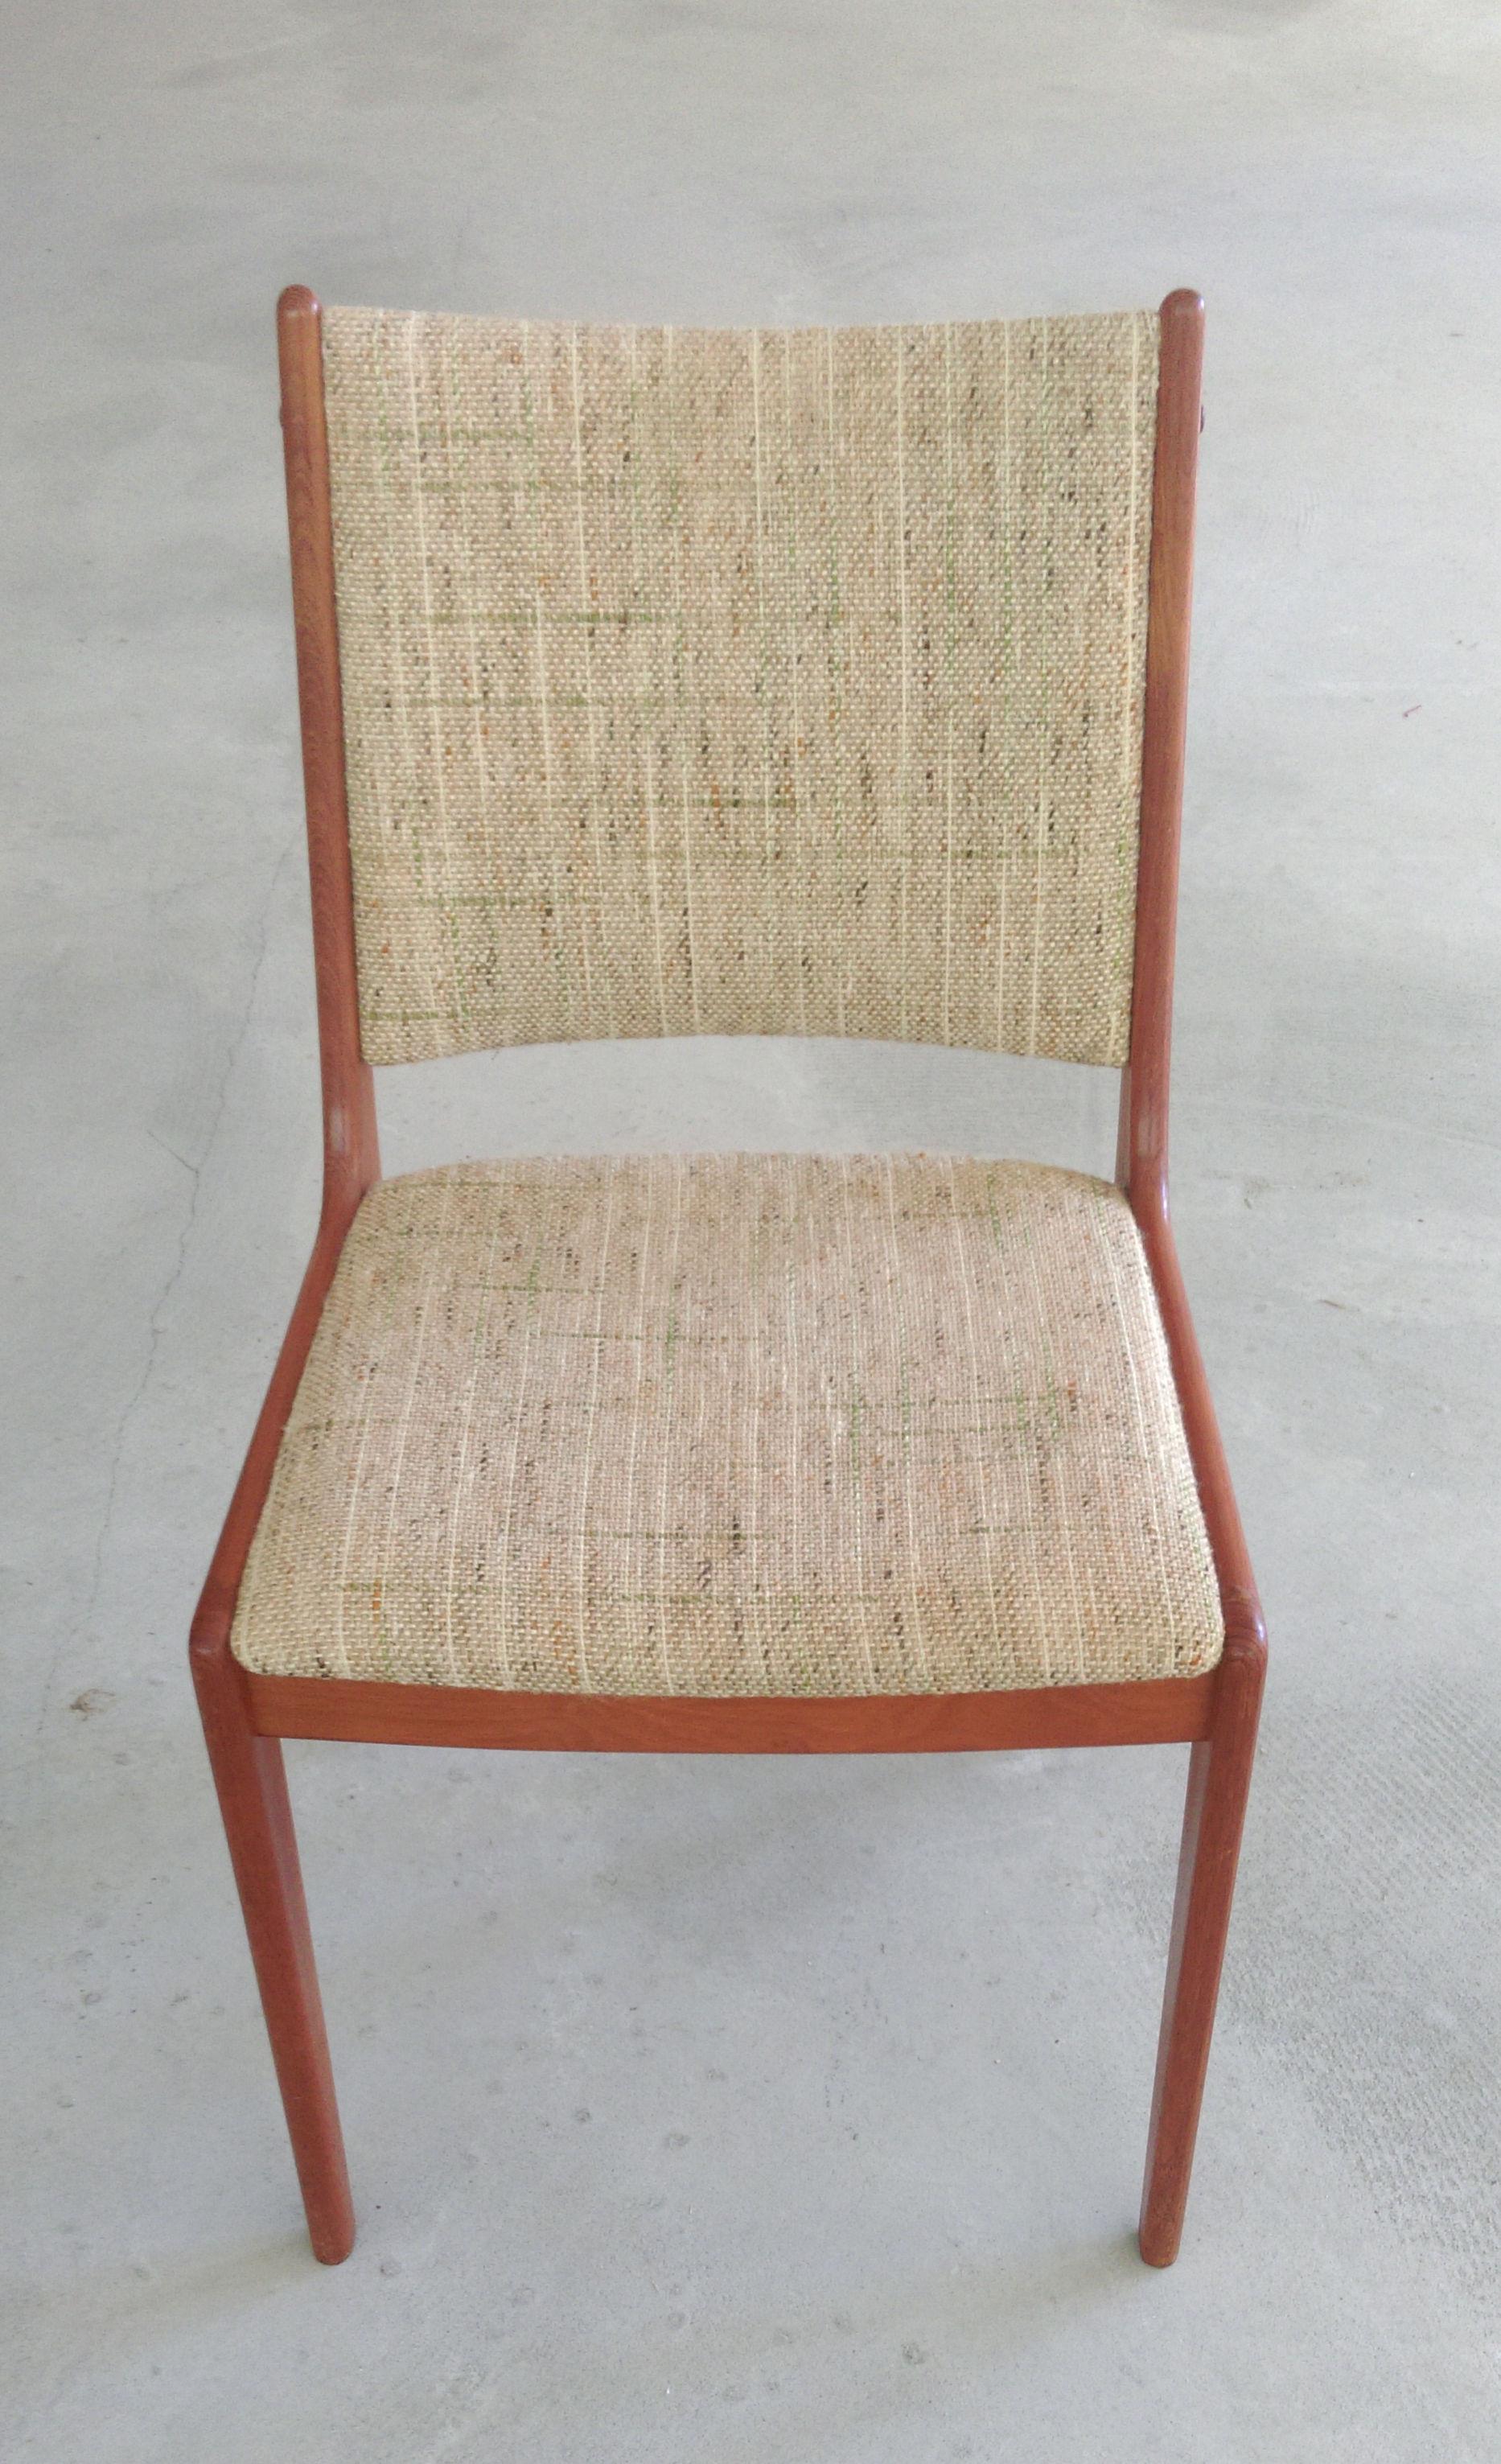 Ten Restored Johannes Andersen Teak Dining Chairs, Custom Reupholstery Included In Good Condition For Sale In Knebel, DK